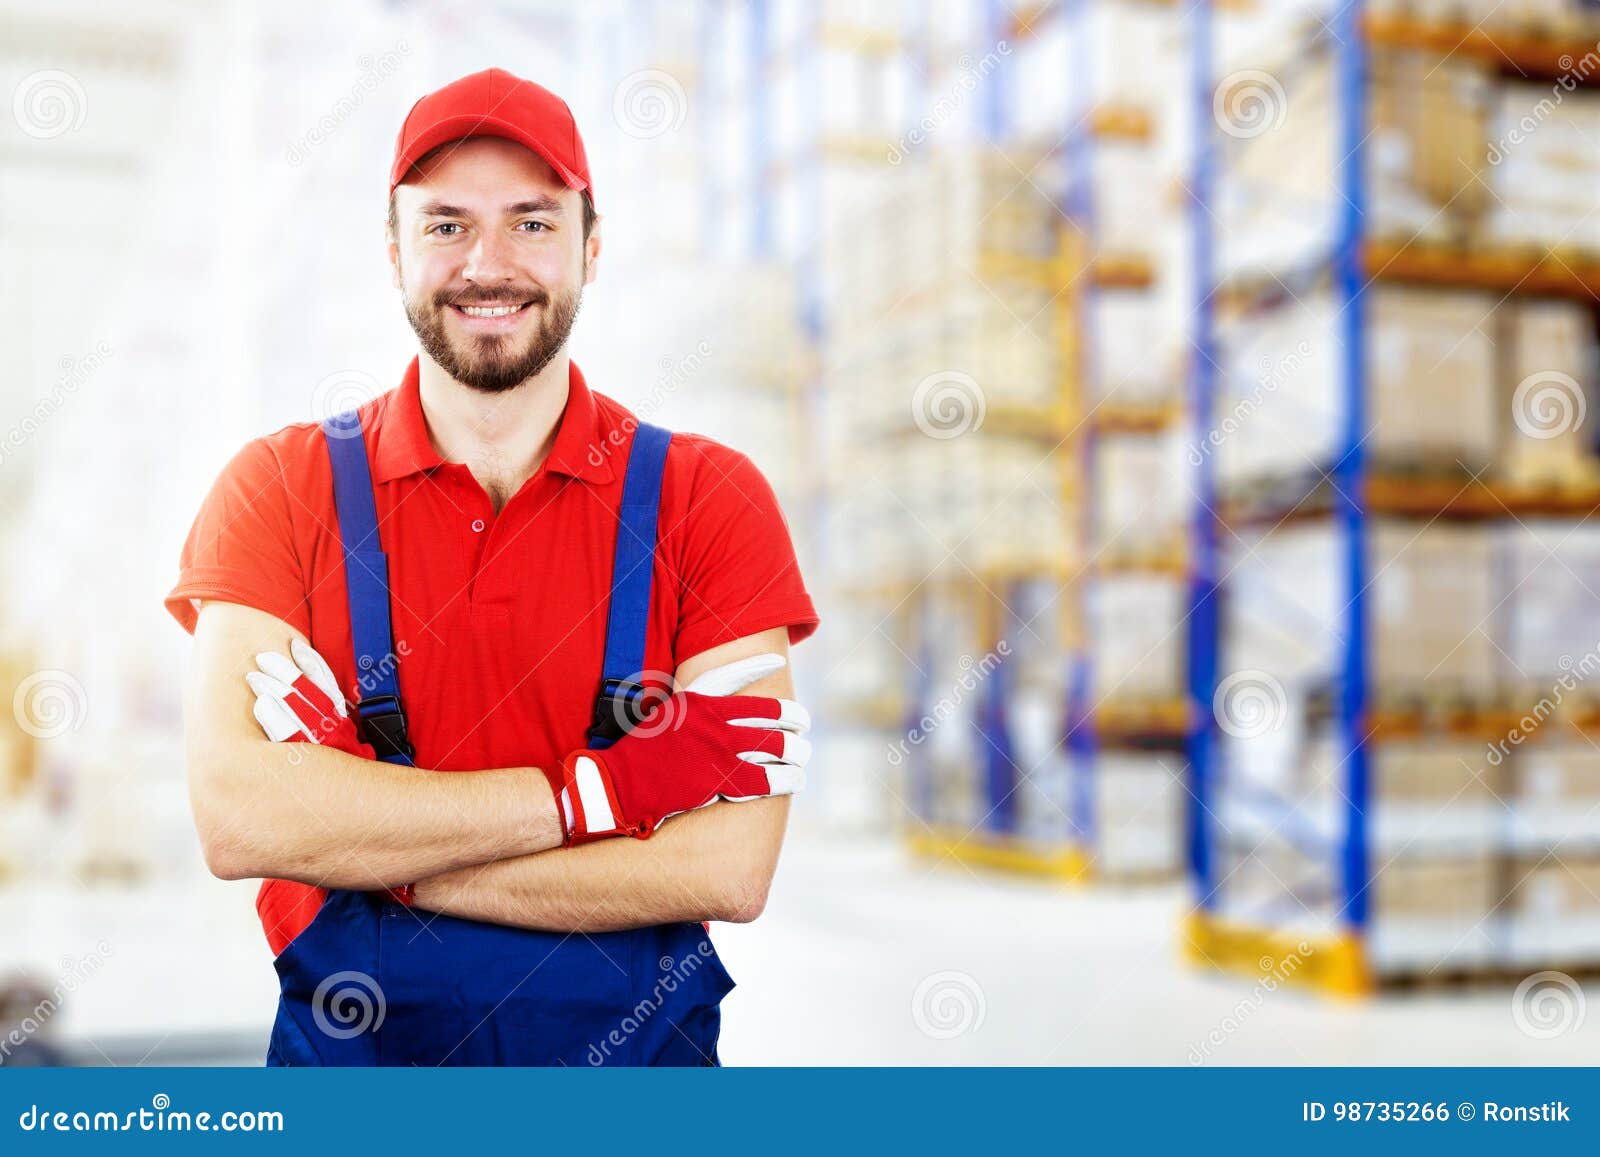 Smiling Young Warehouse Worker in Red Uniform Stock Photo - Image of